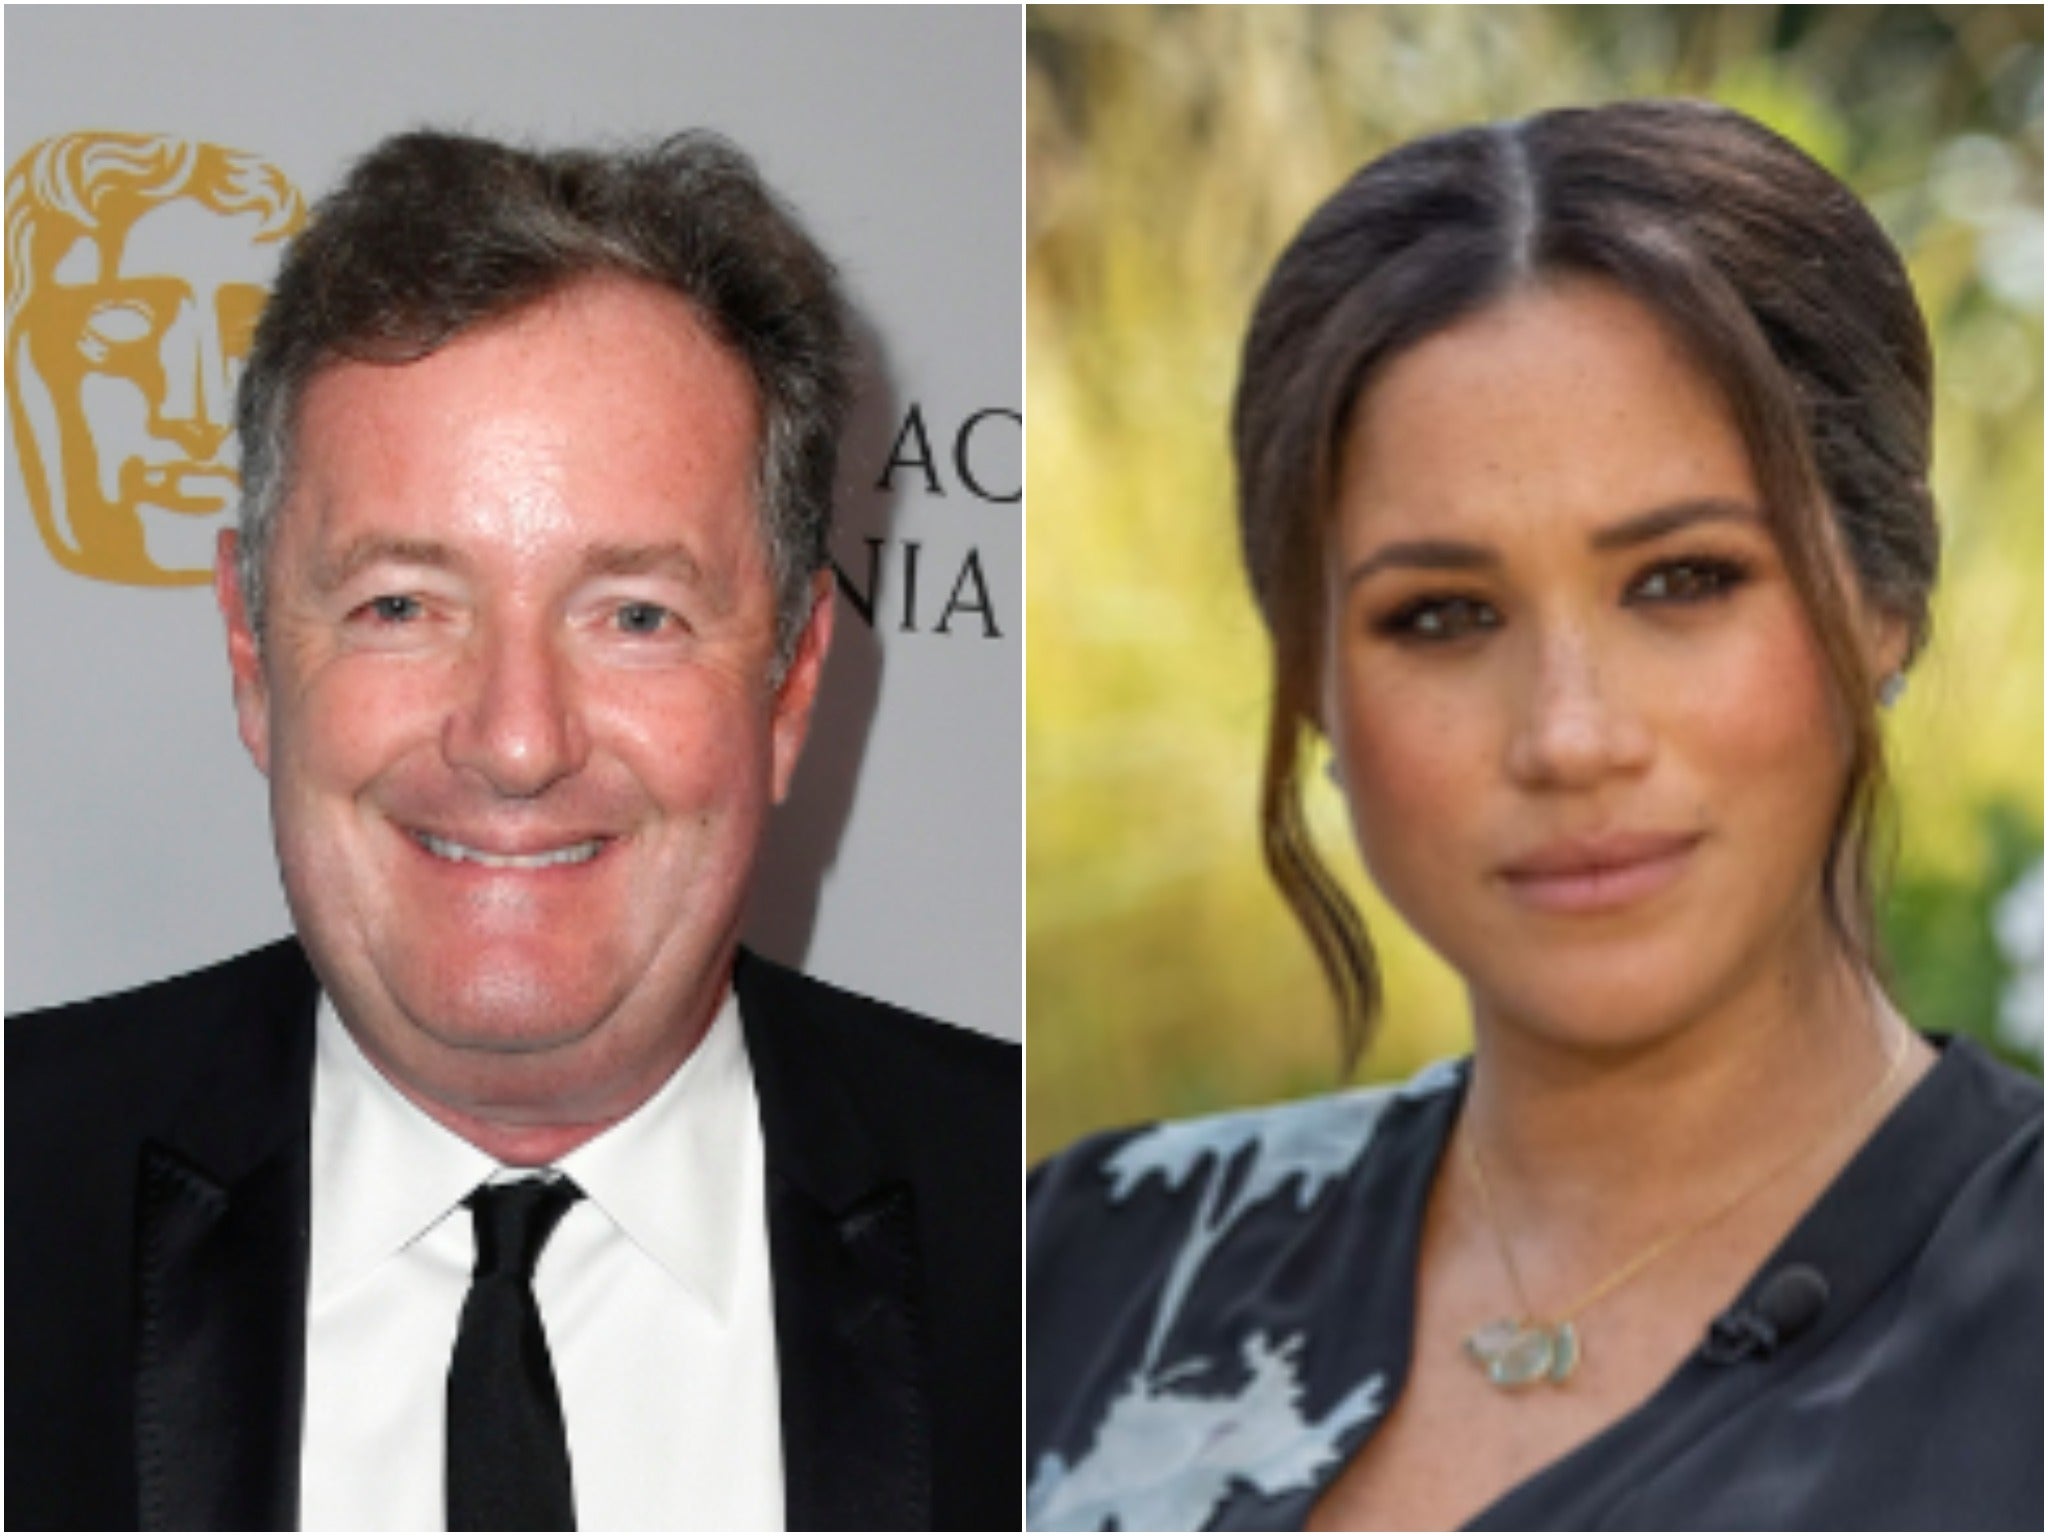 daily mail uk piers morgan meghan markle